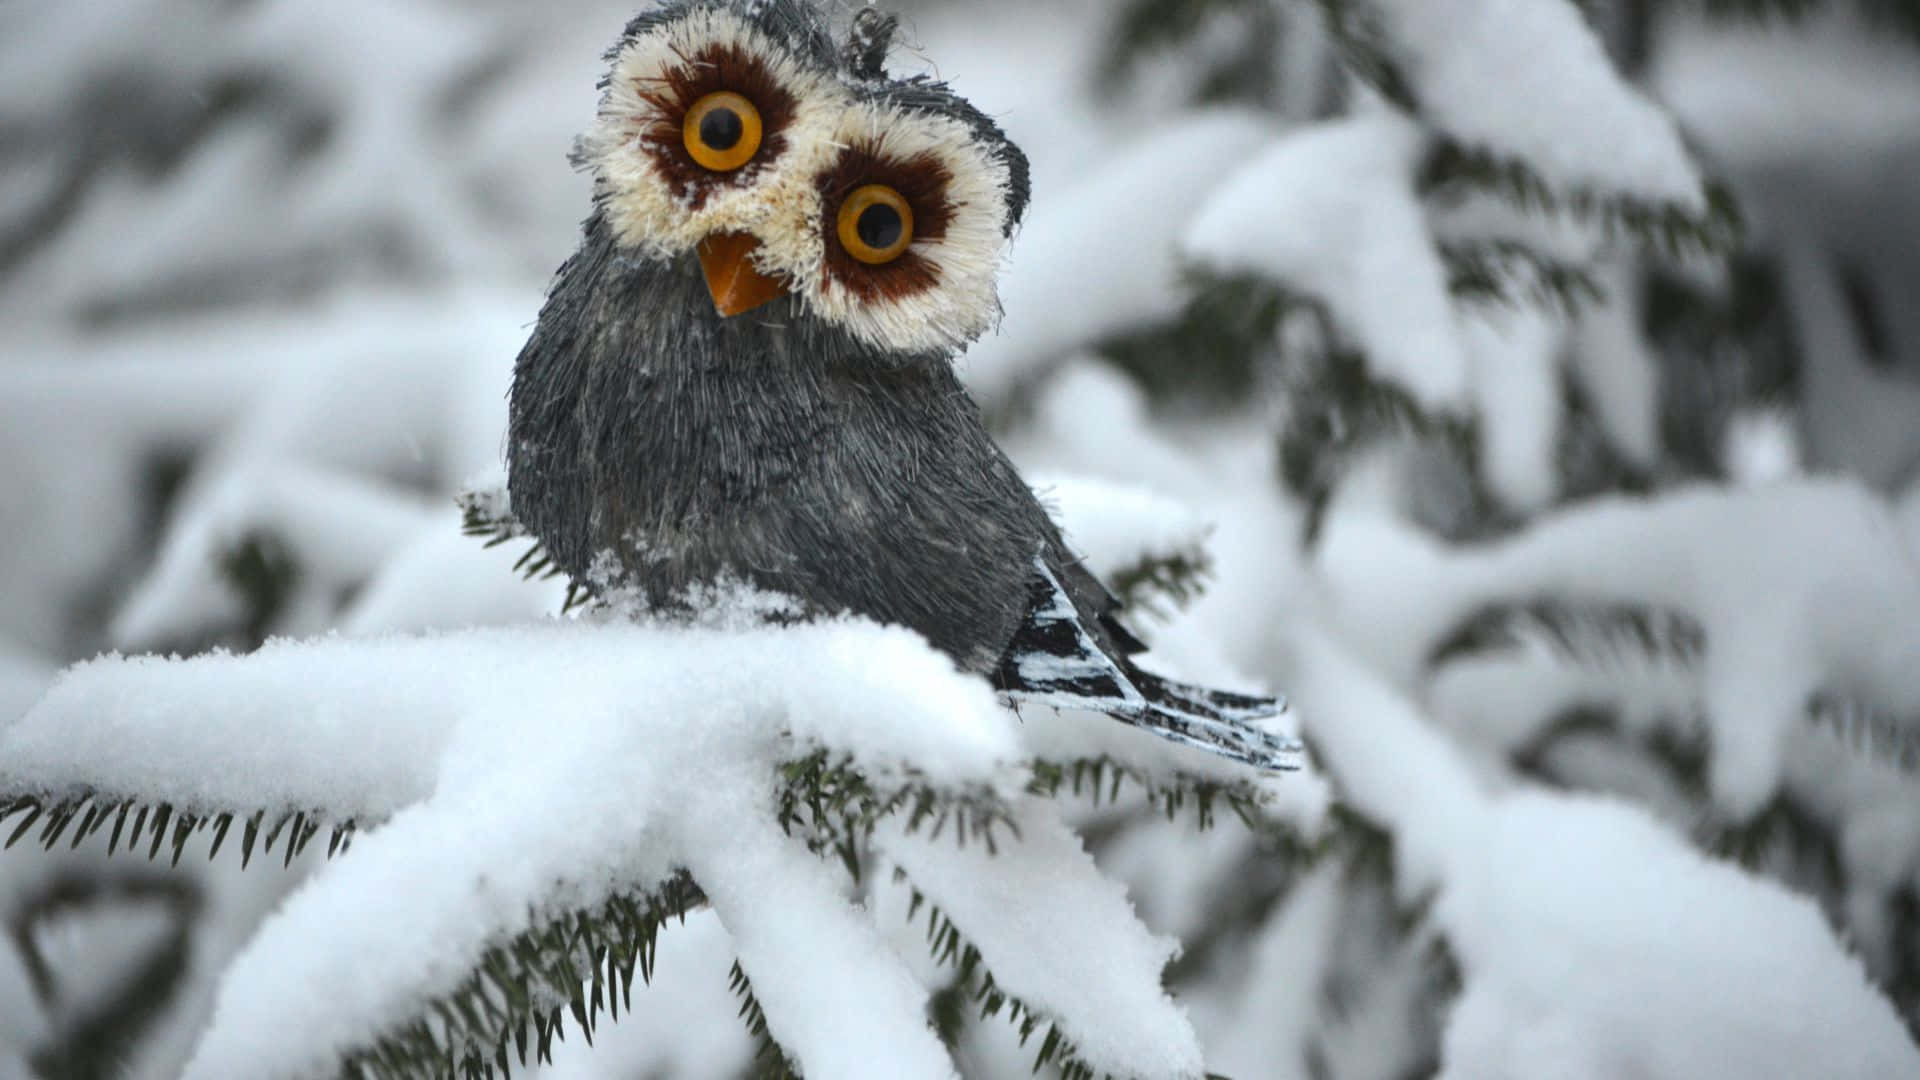 Funny Cute Owl Bird Picture